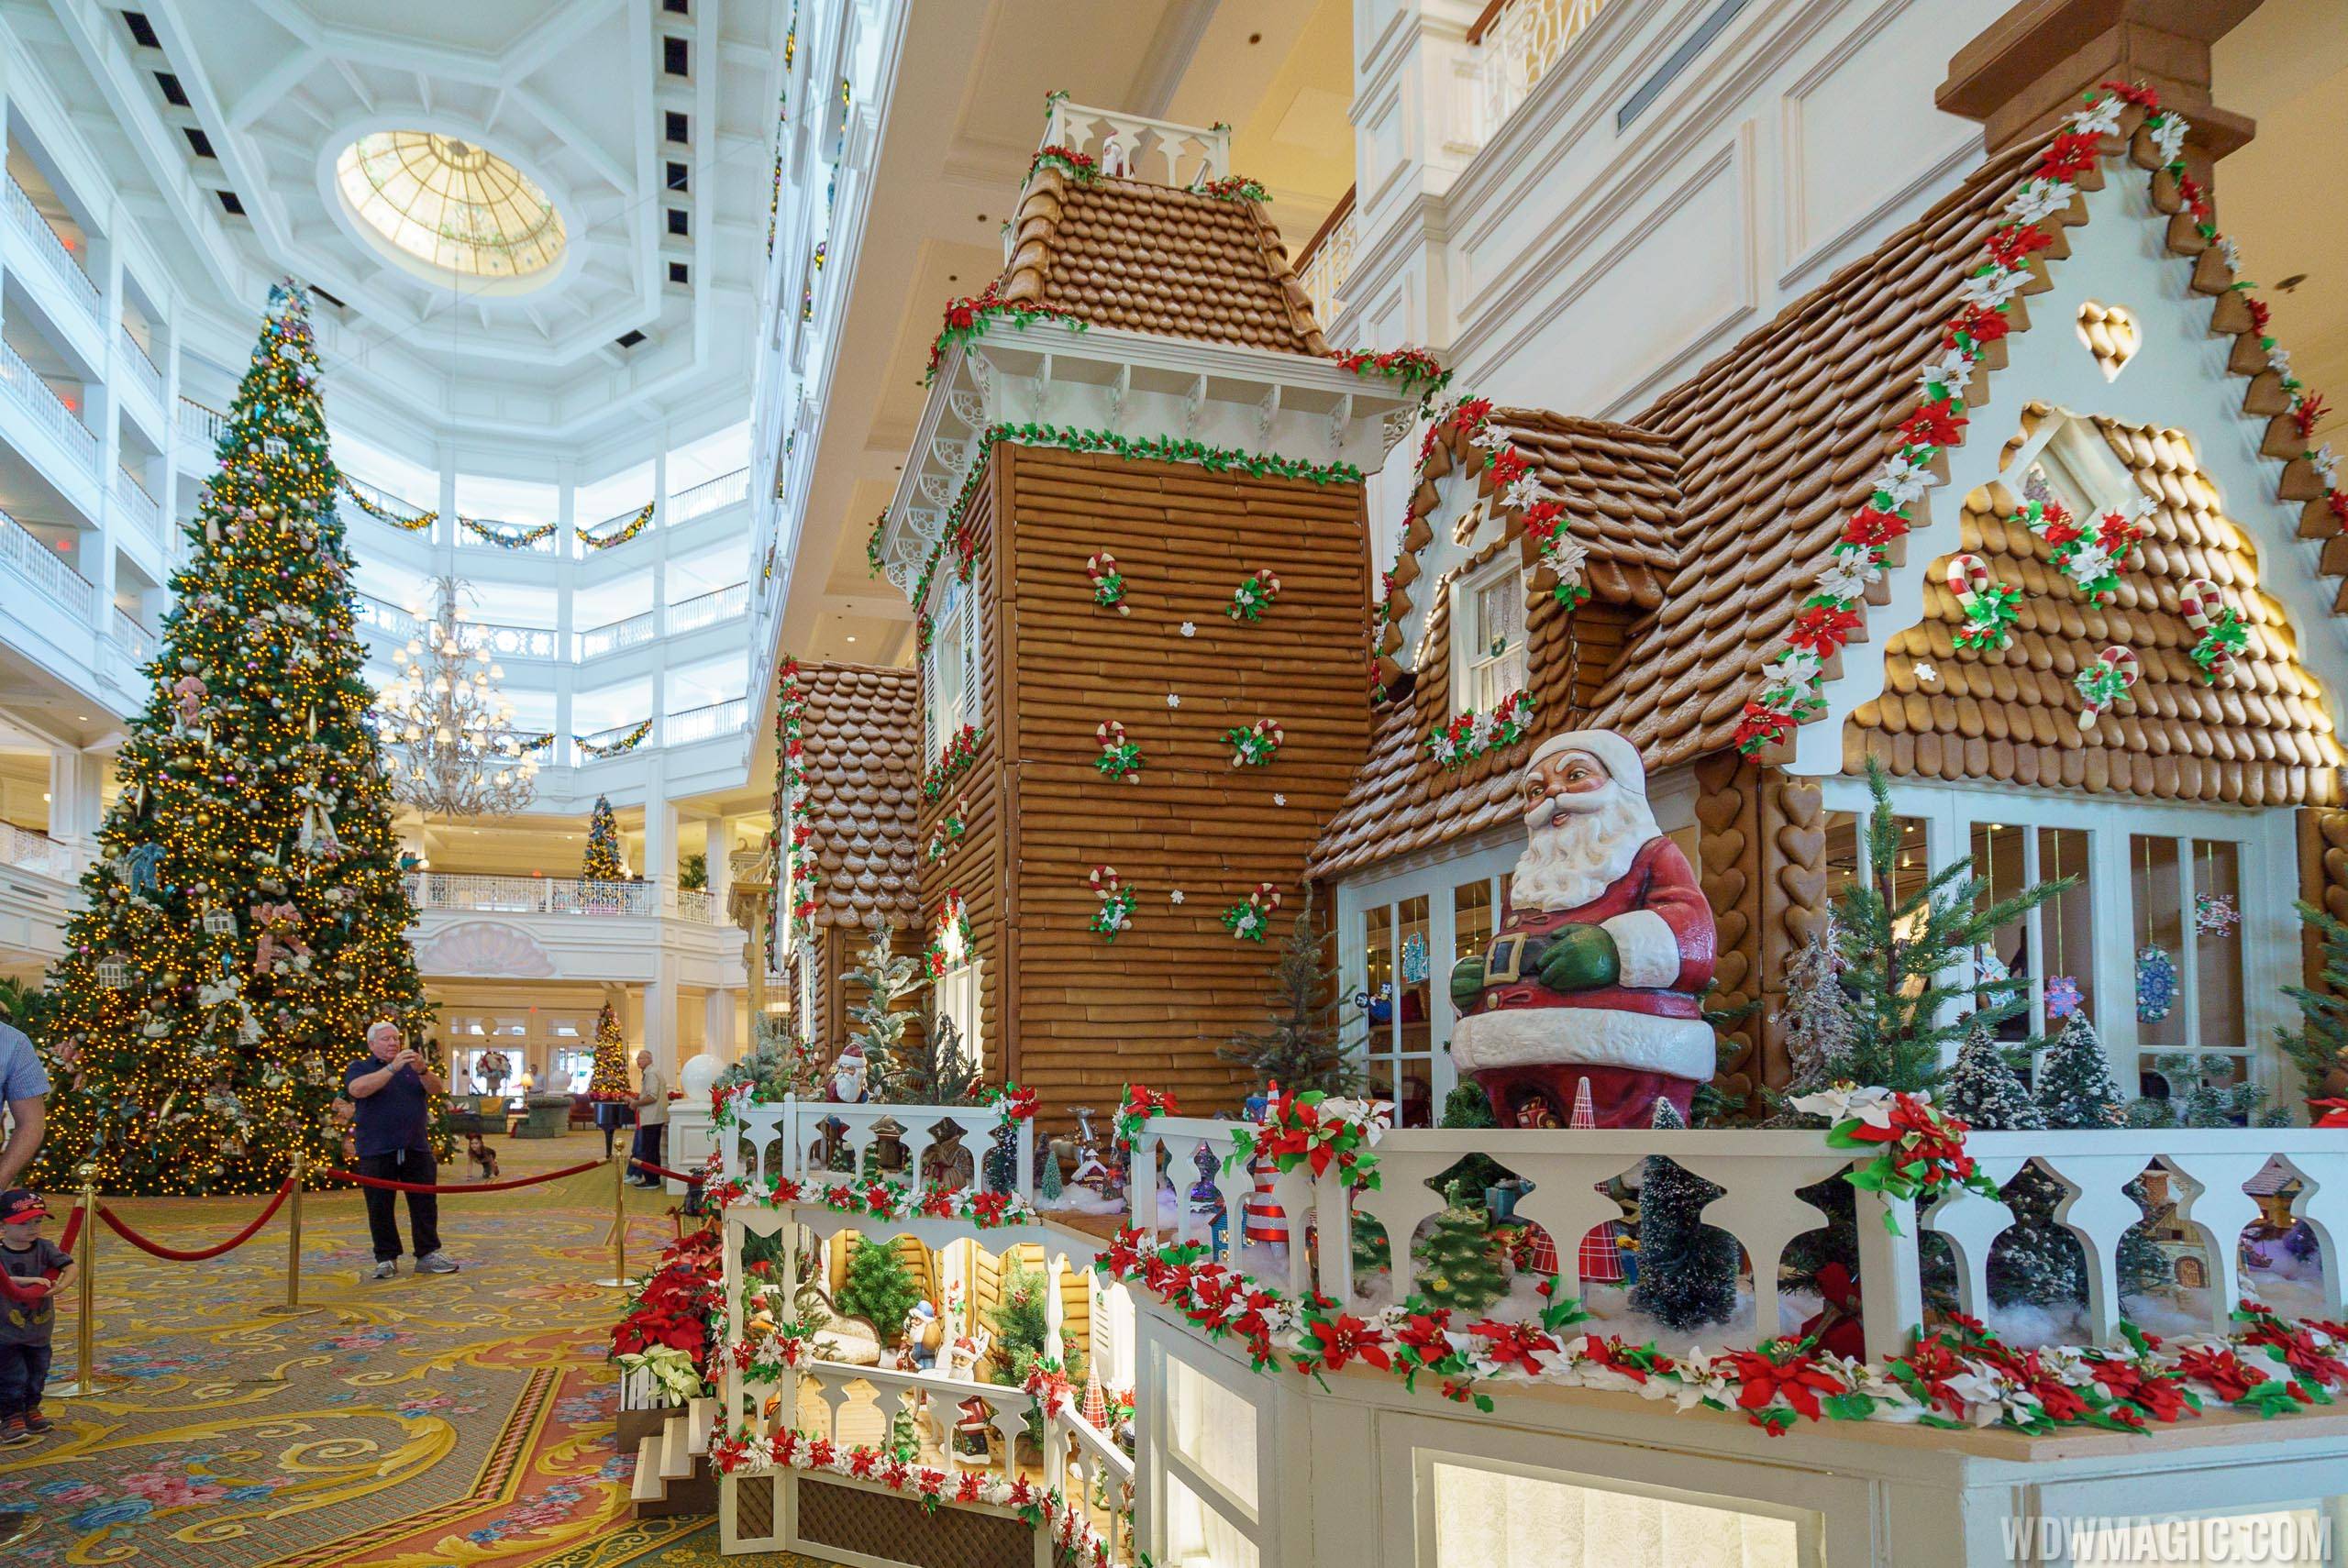 2017 Grand Floridian Gingerbread House